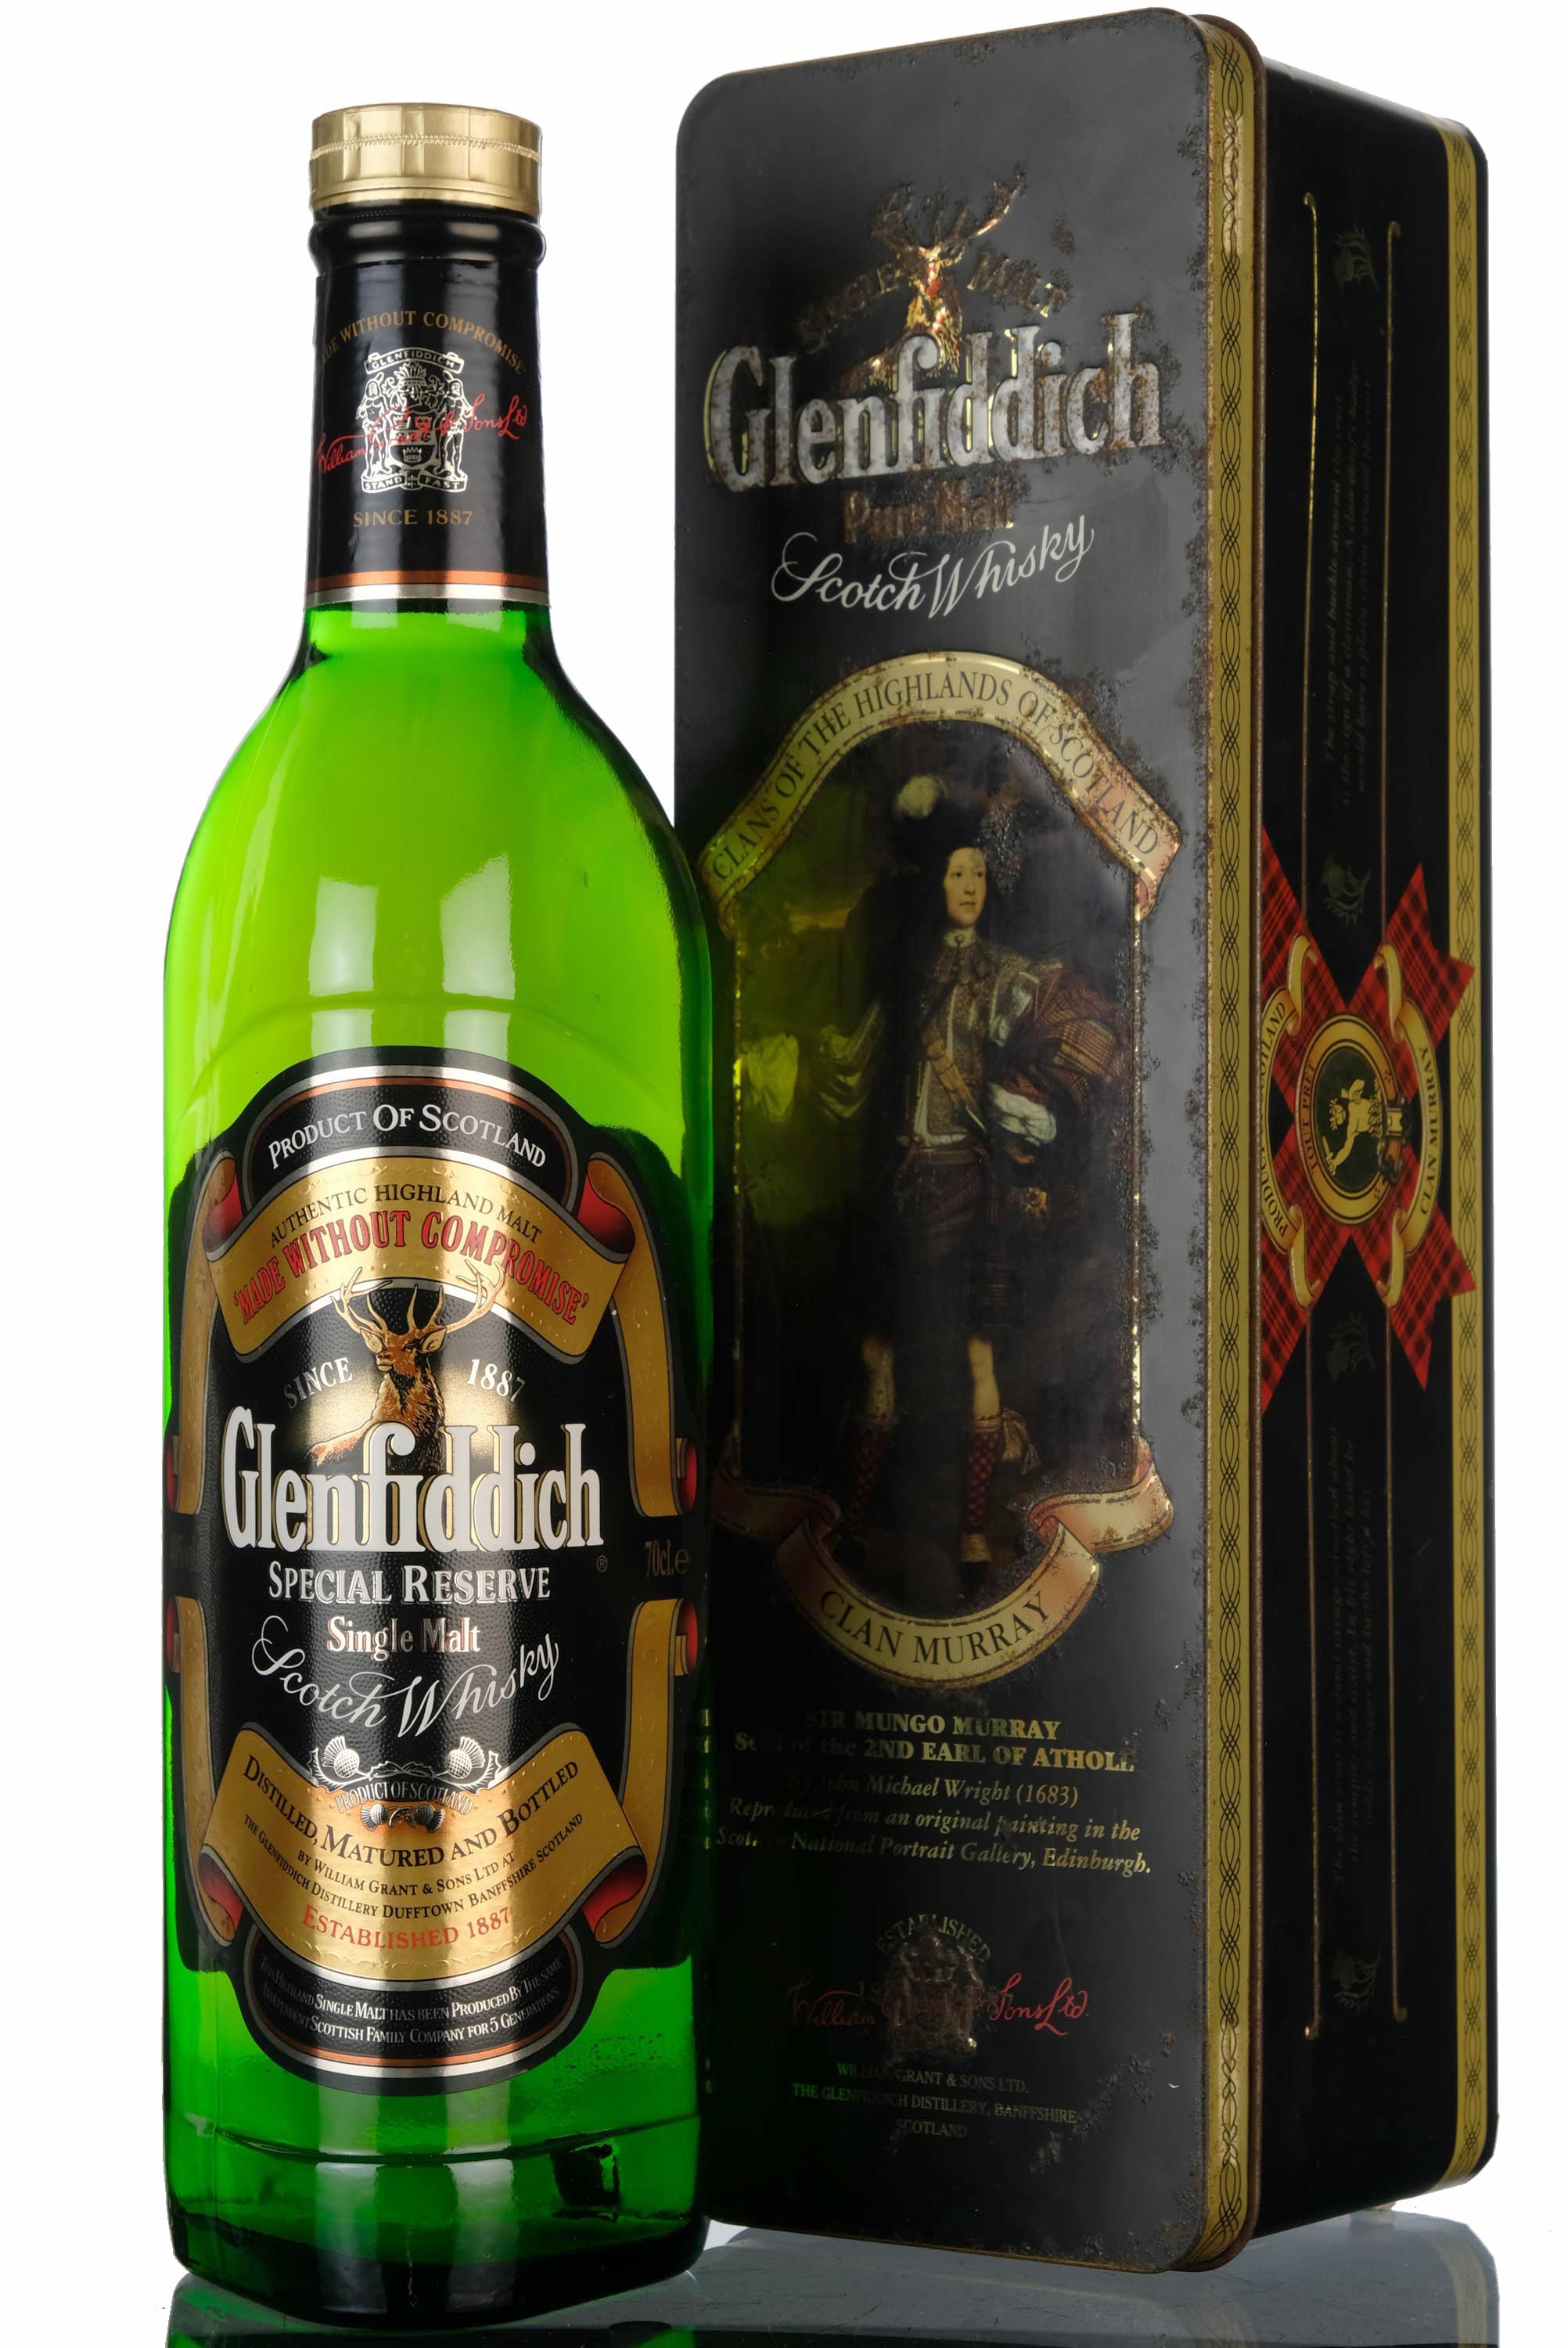 Glenfiddich Special Reserve - Charity Auction Zero Buyers Fees